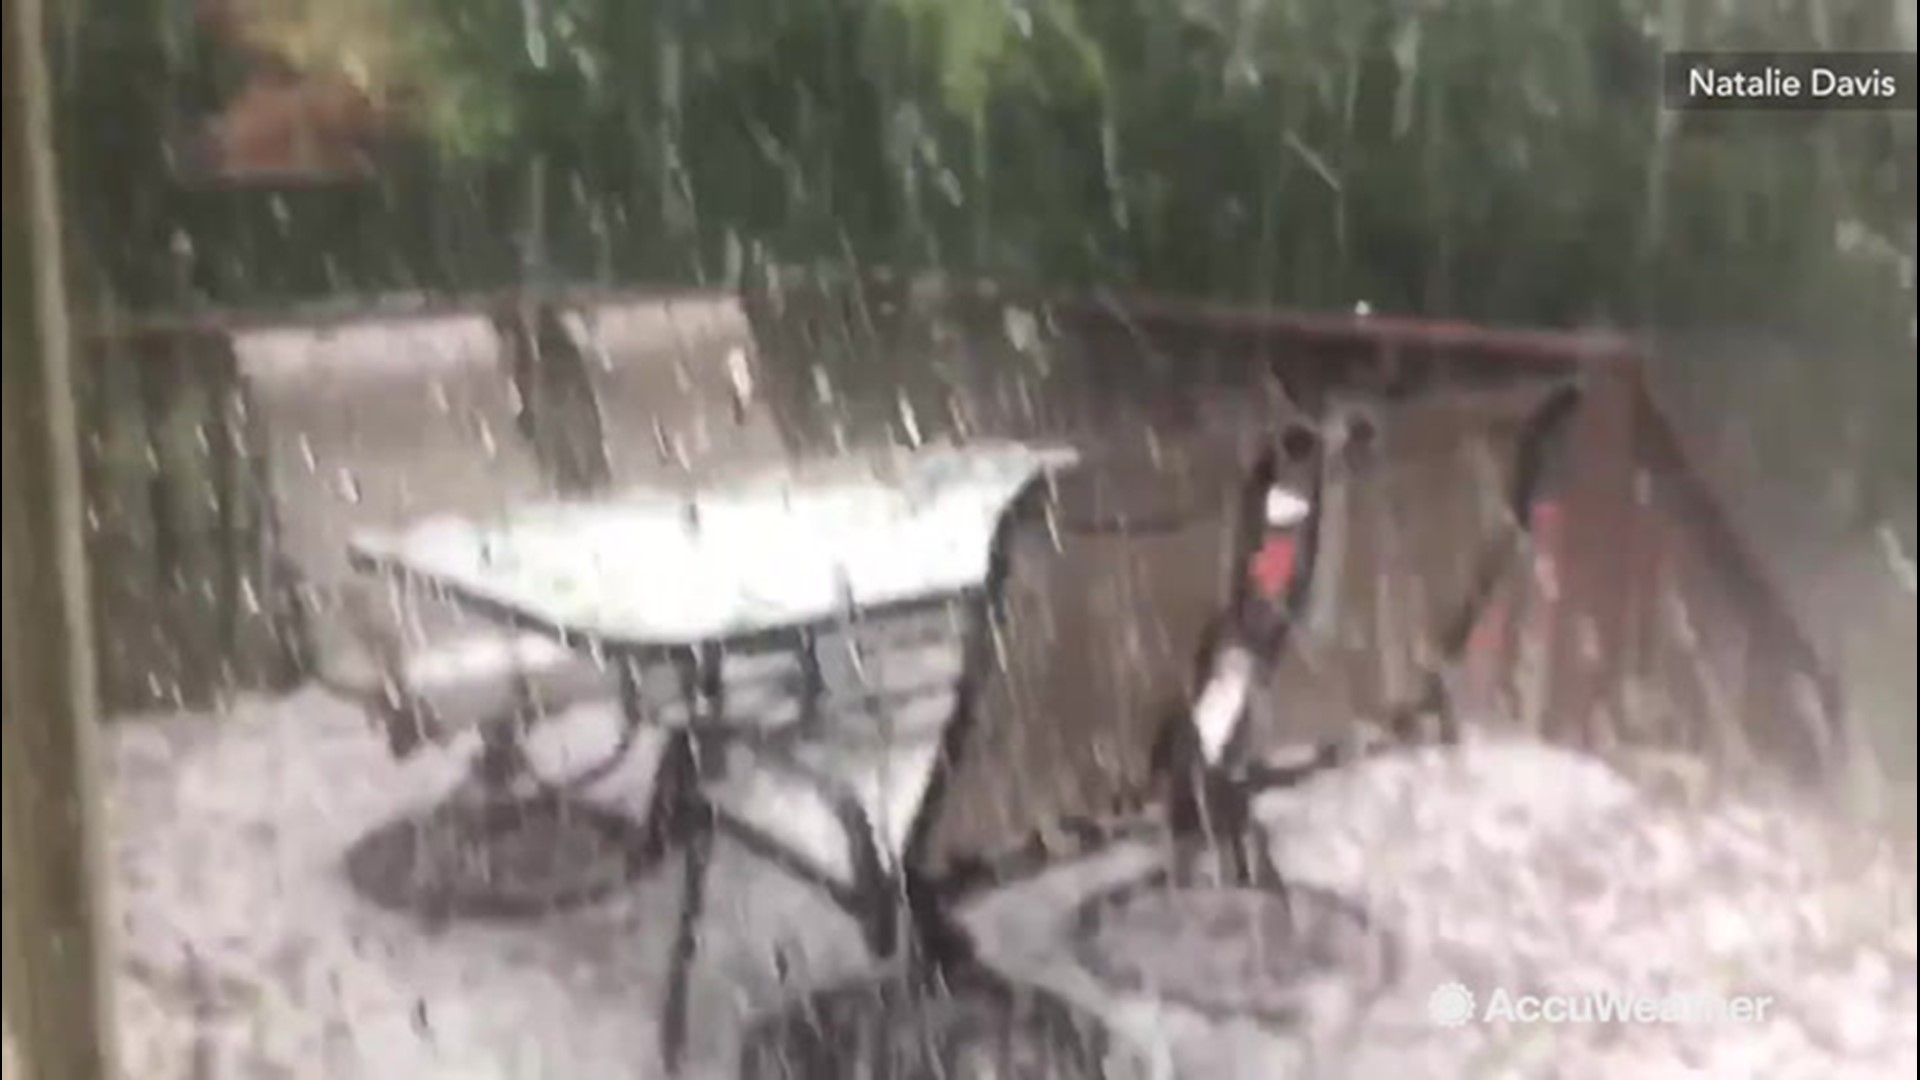 A storm pelted Wichita, Kansas with hail on June 18 that covered this patio as a dog watches from inside.